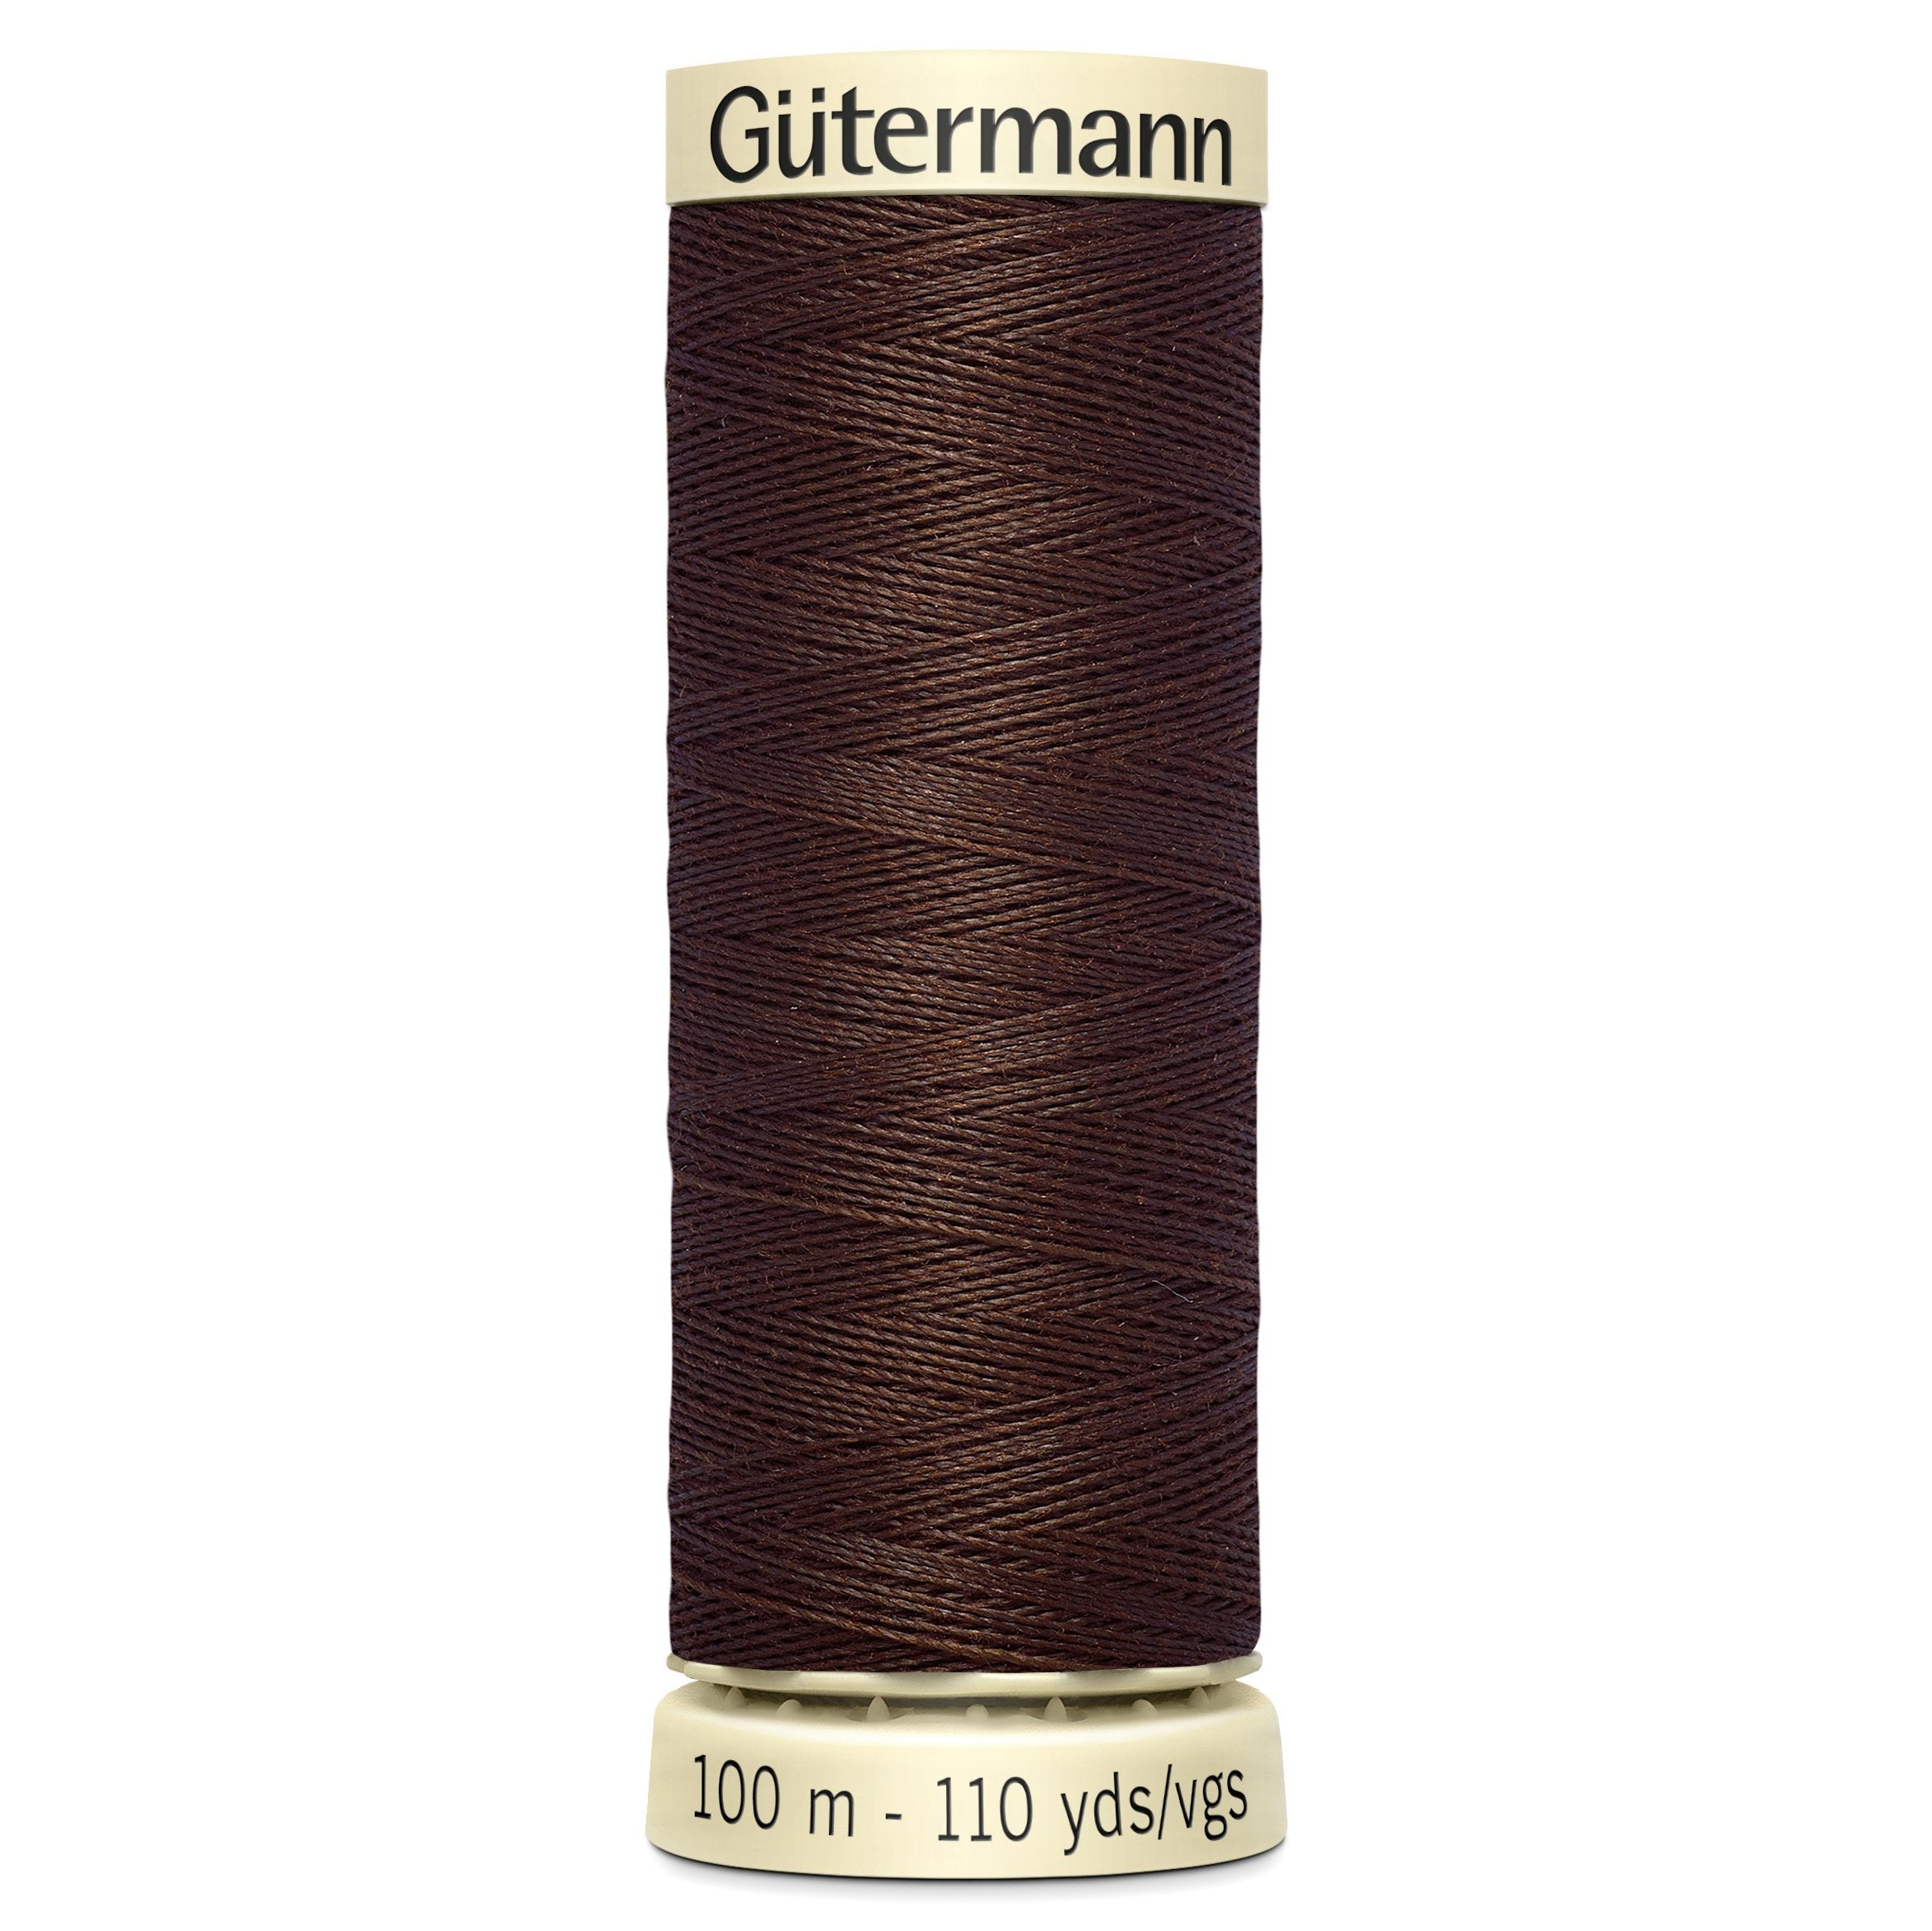 Gutermann Sew All Thread colour 694 Dark Brown from Jaycotts Sewing Supplies